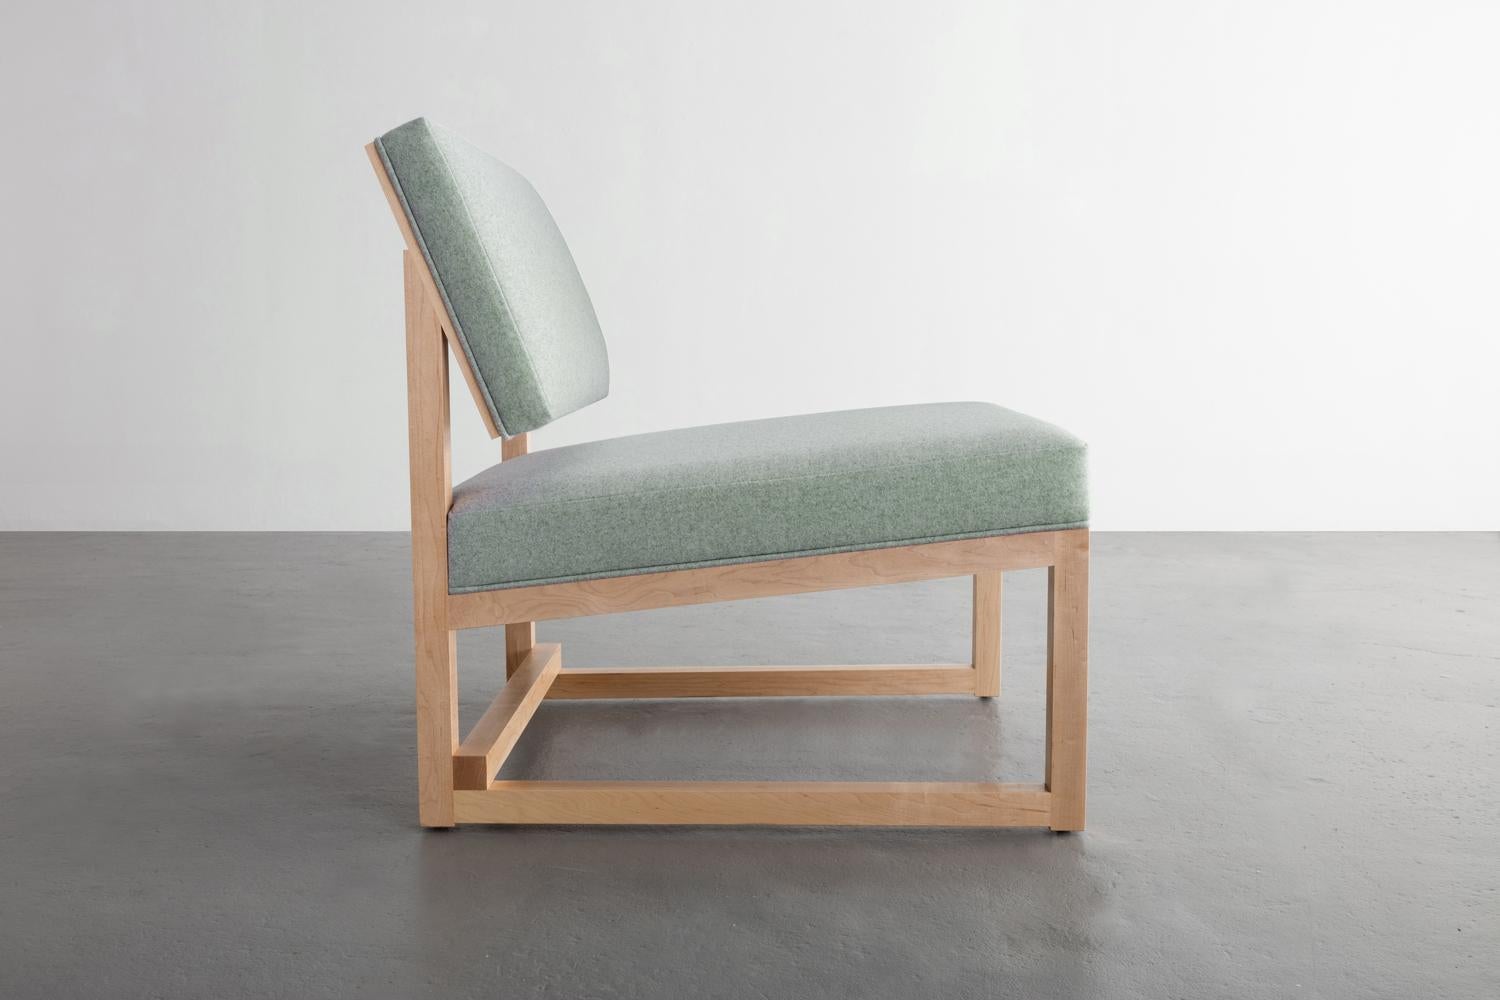 Available in solid white oak, maple or walnut
Upholstery in Divina MD wool felt by Kvadrat, or boucle by designtex
Also available in cusomer's own material or leather (COM and COL)
